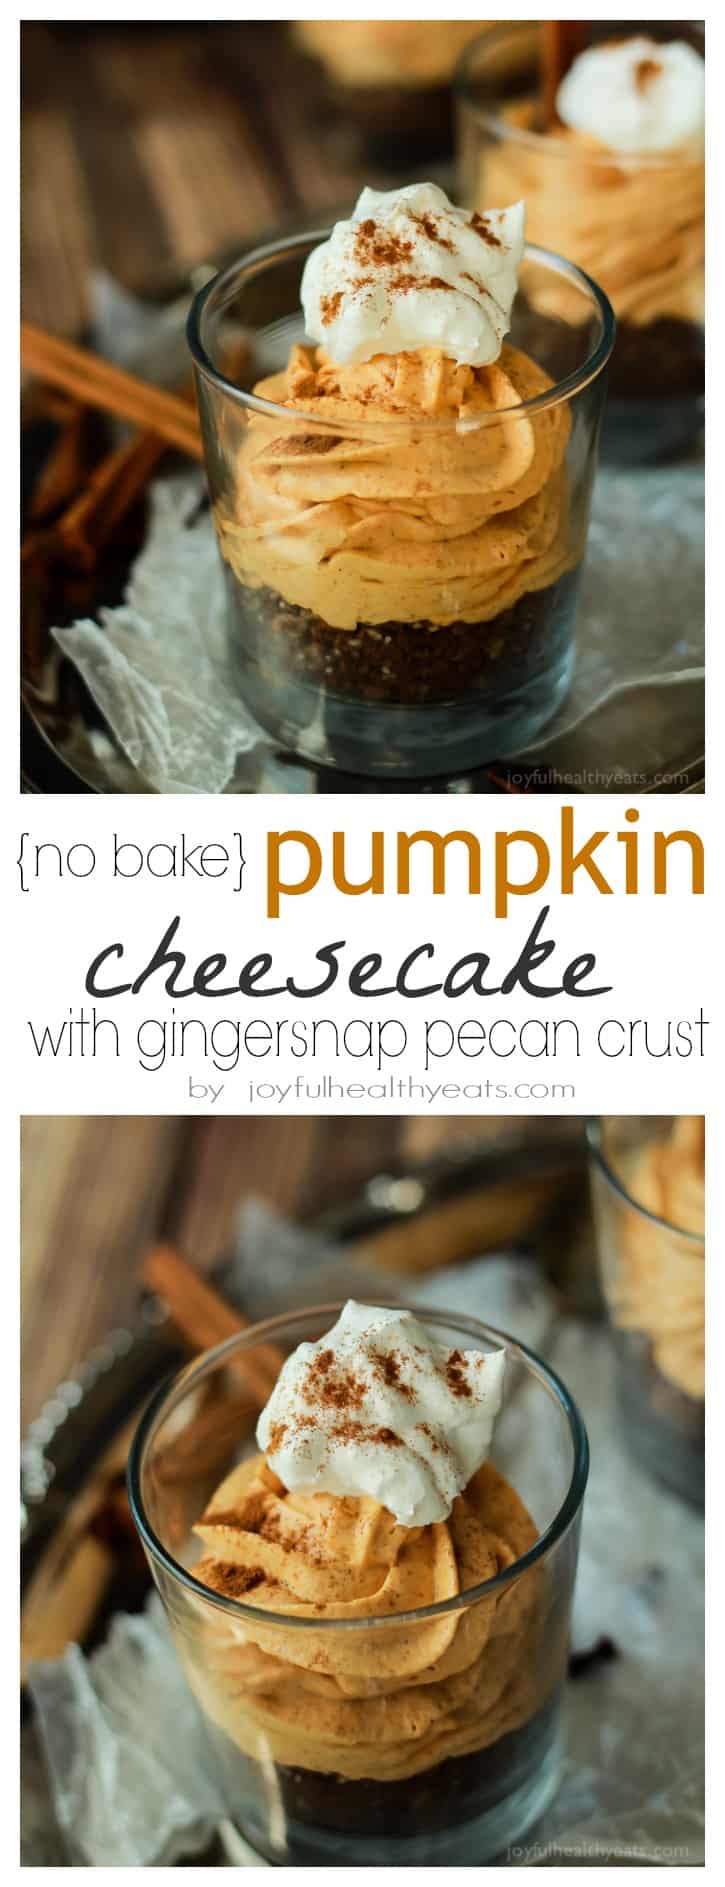 A Collage Containing Two Pictures of Single-Serving Pumpkin Cheesecakes Garnished with Cinnamon